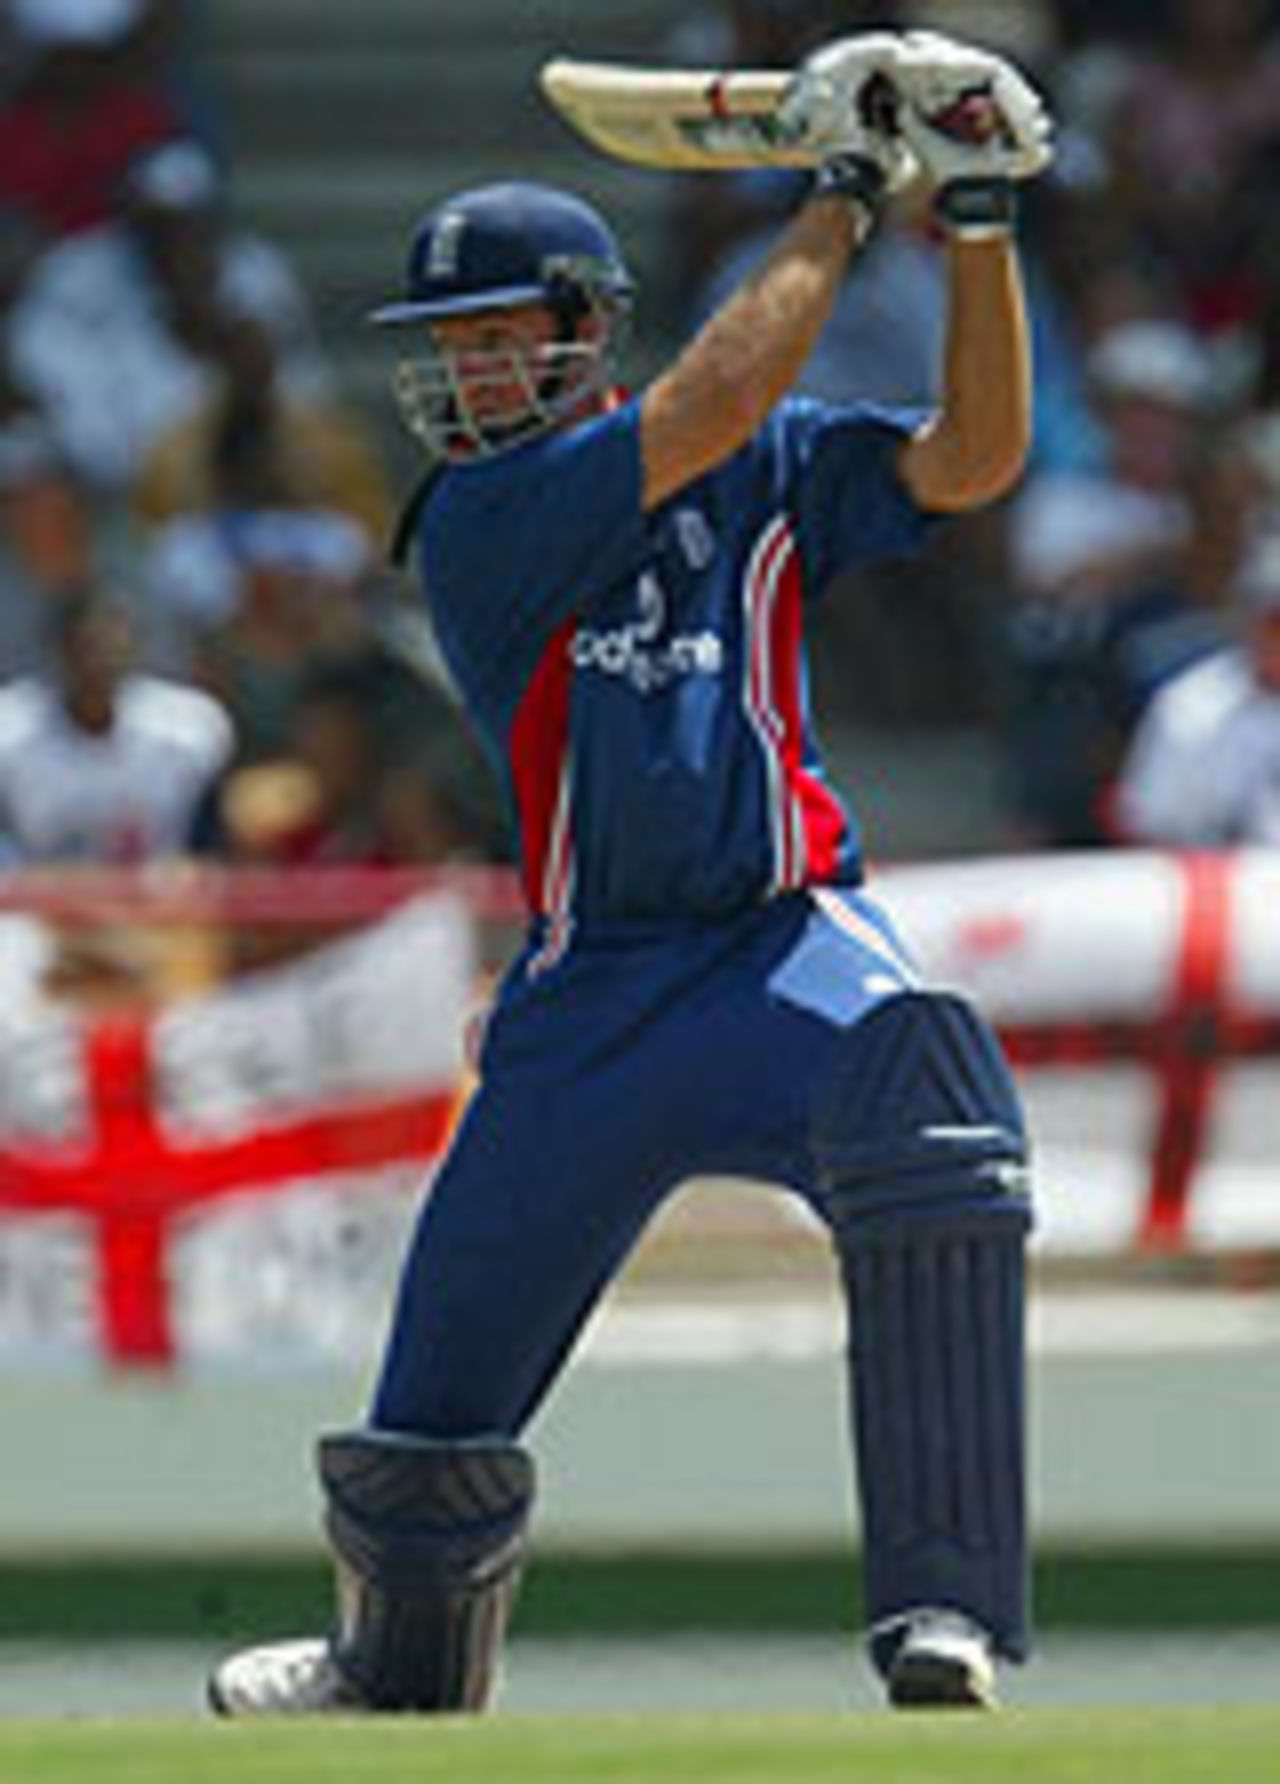 Michael Vaughan drives through the covers, en route to his 67 in the sixth ODI in St Lucia, West Indies v England, 5th ODI, St Lucia, May 2, 2004